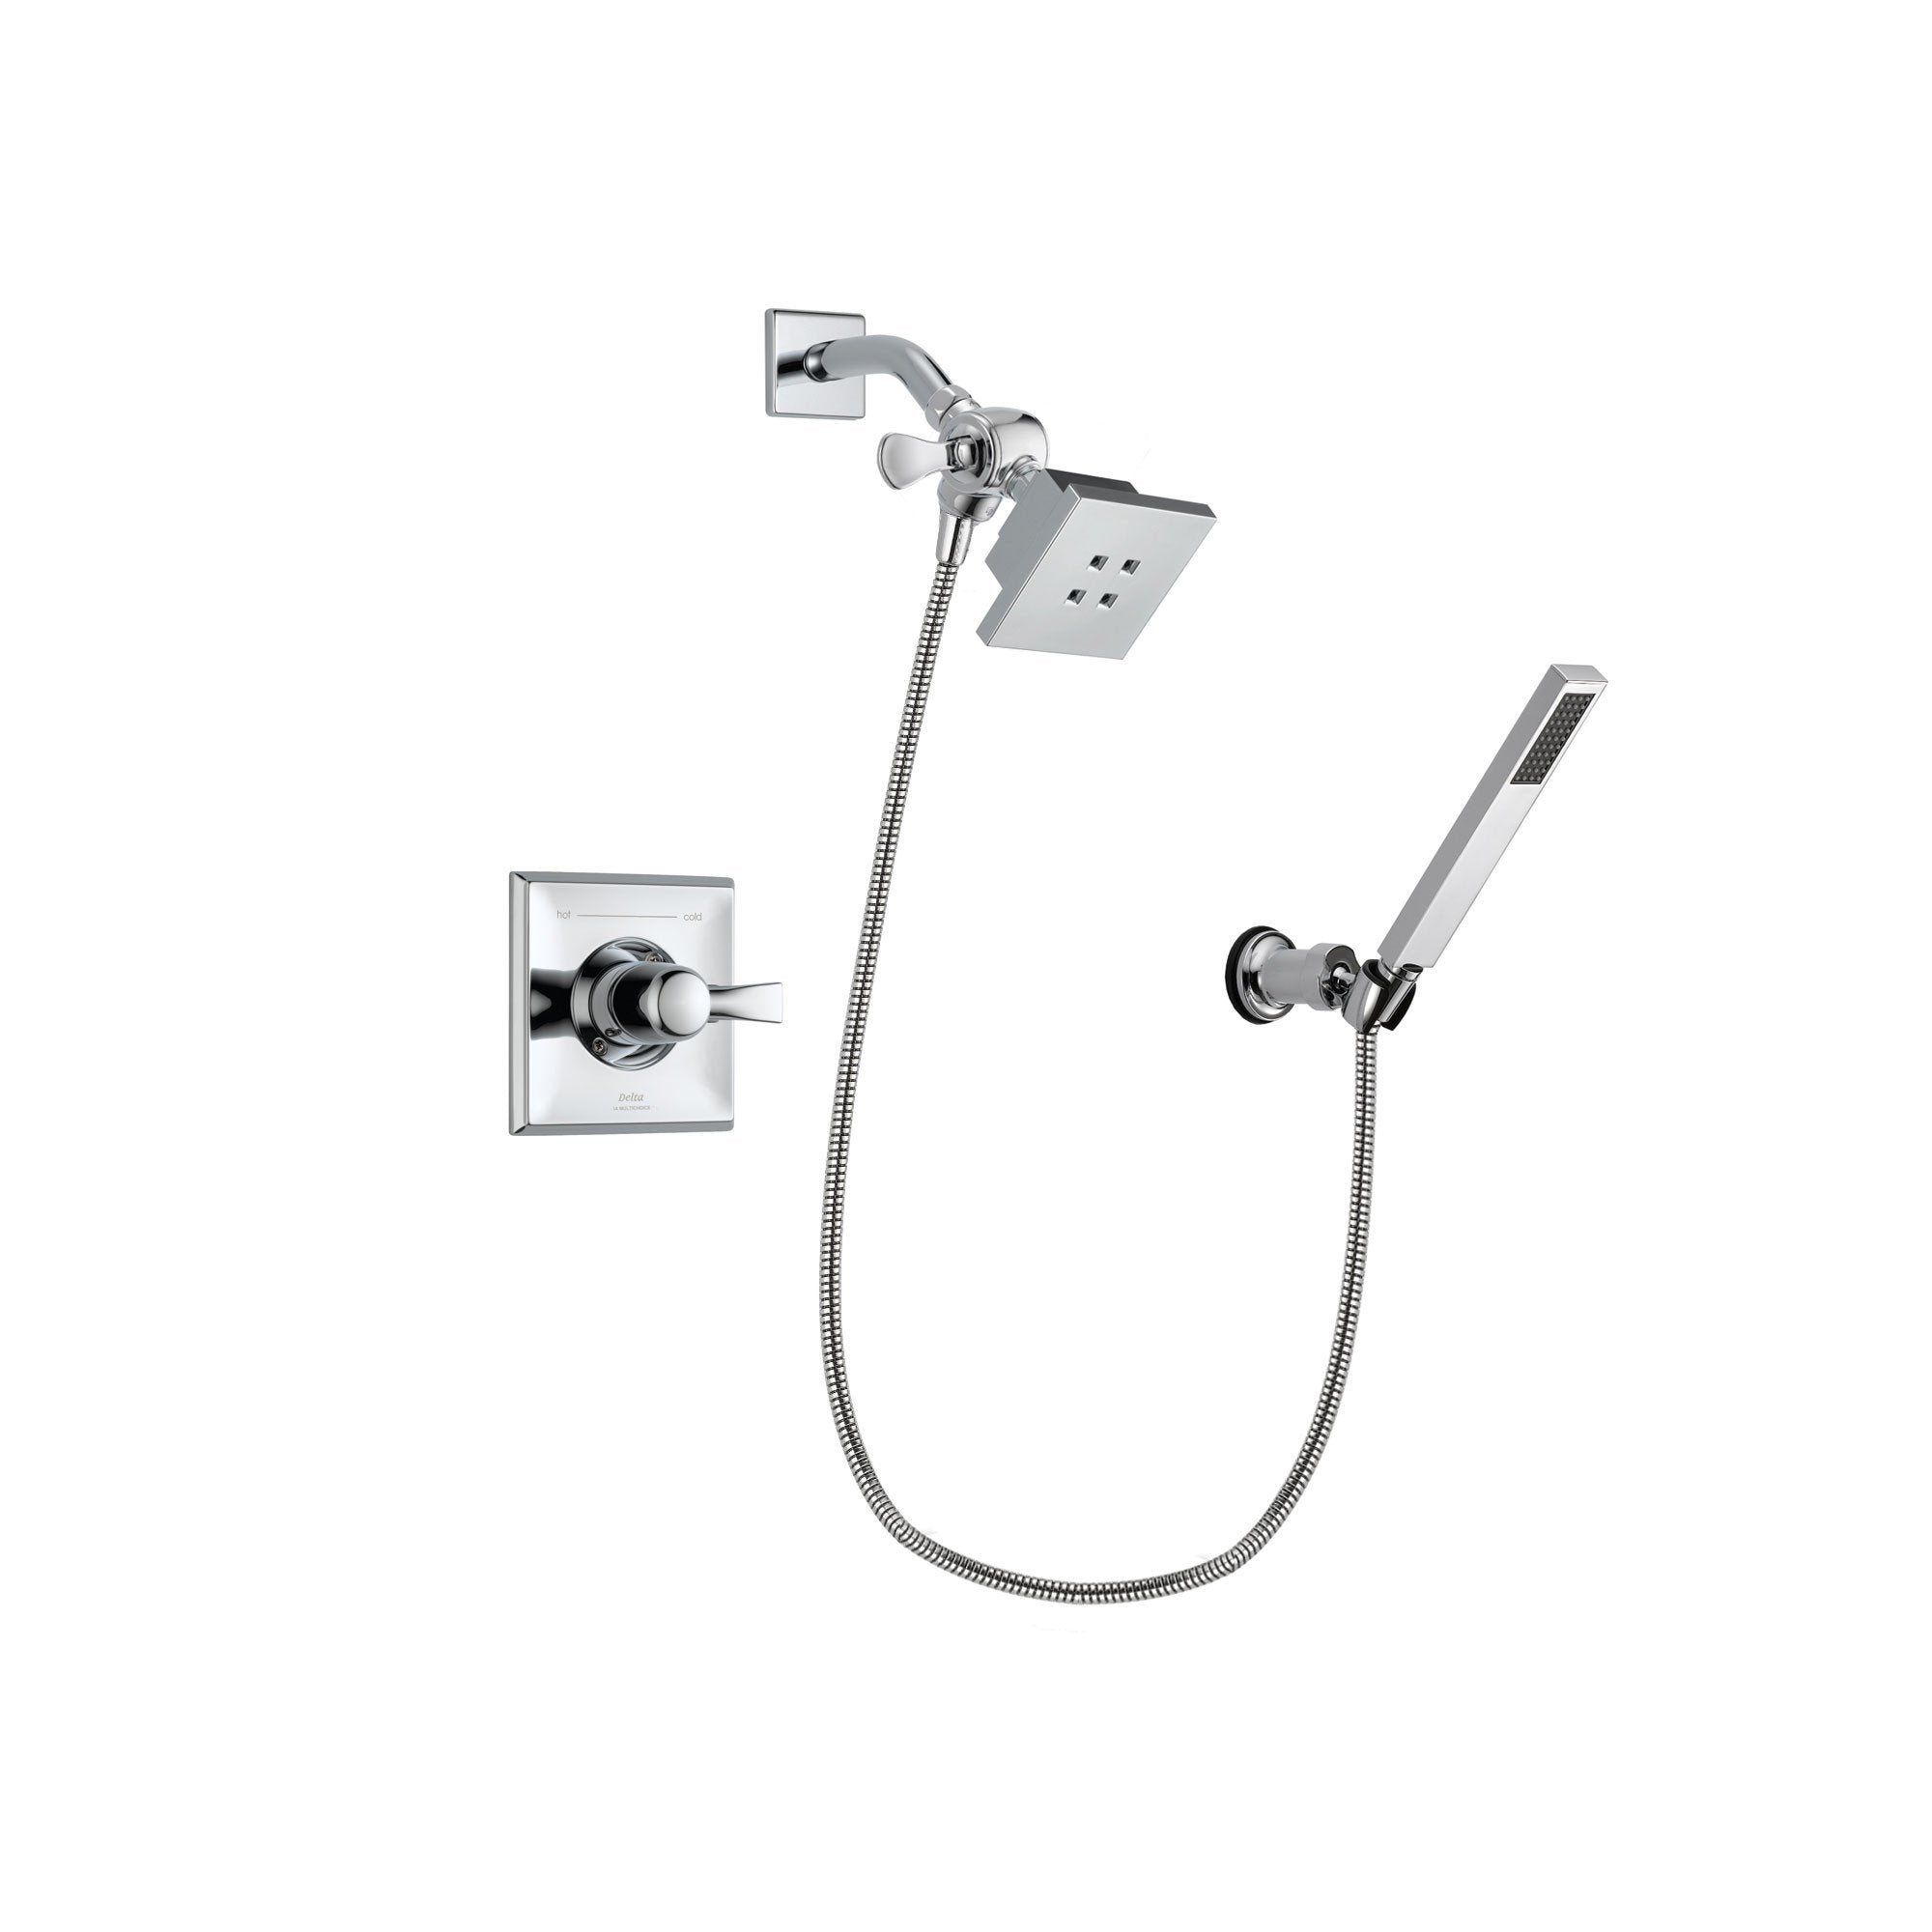 Delta Dryden Chrome Finish Shower Faucet System Package with Square Showerhead and Modern Handheld Shower Spray with Wall Bracket and Hose Includes Rough-in Valve DSP0104V